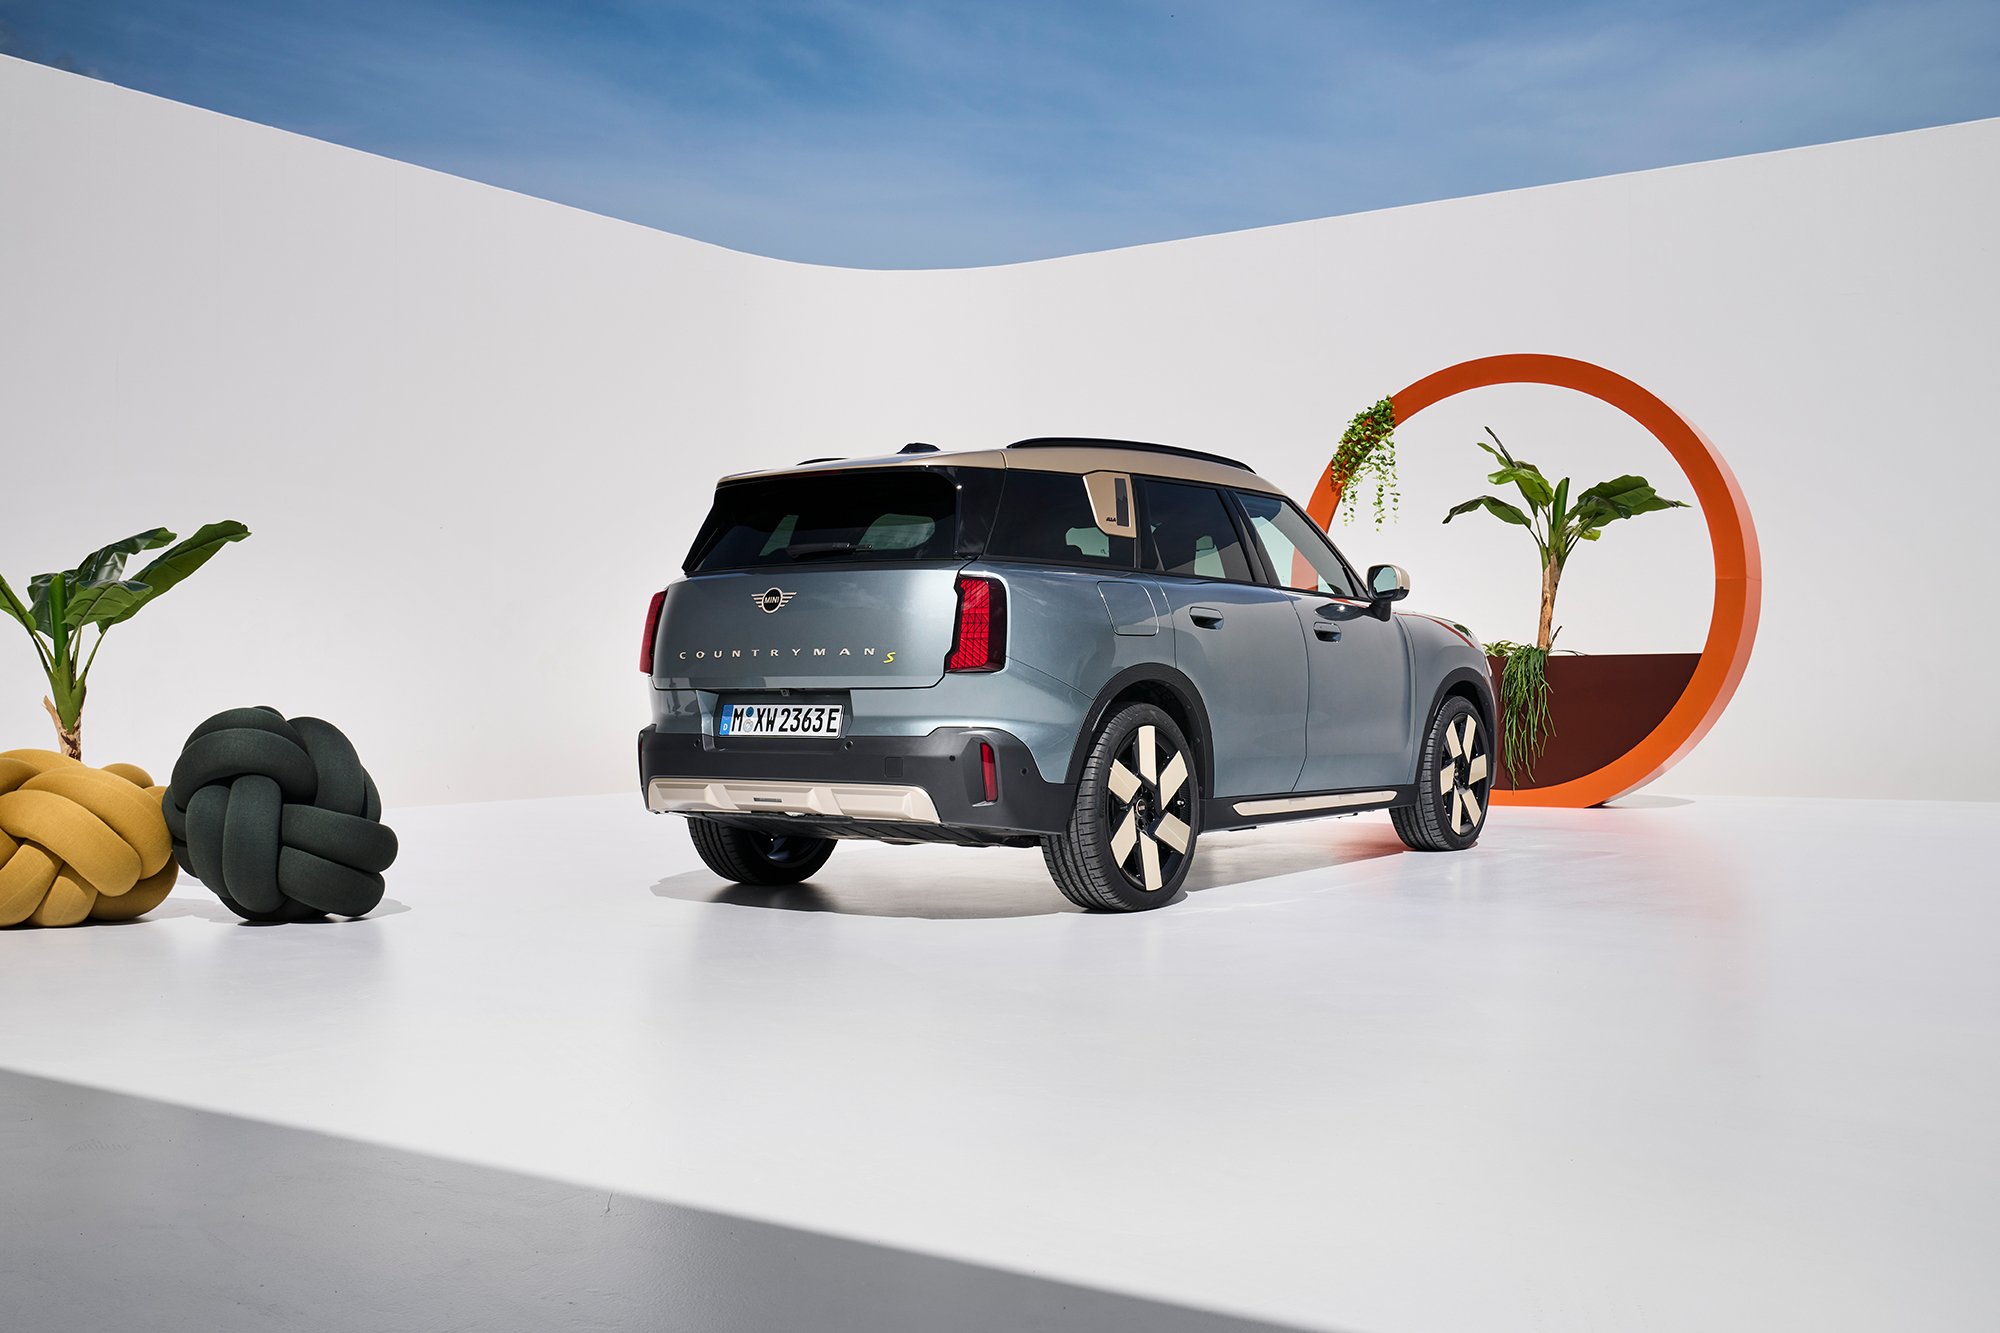 The exterior design of the new all-electric MINI Countryman